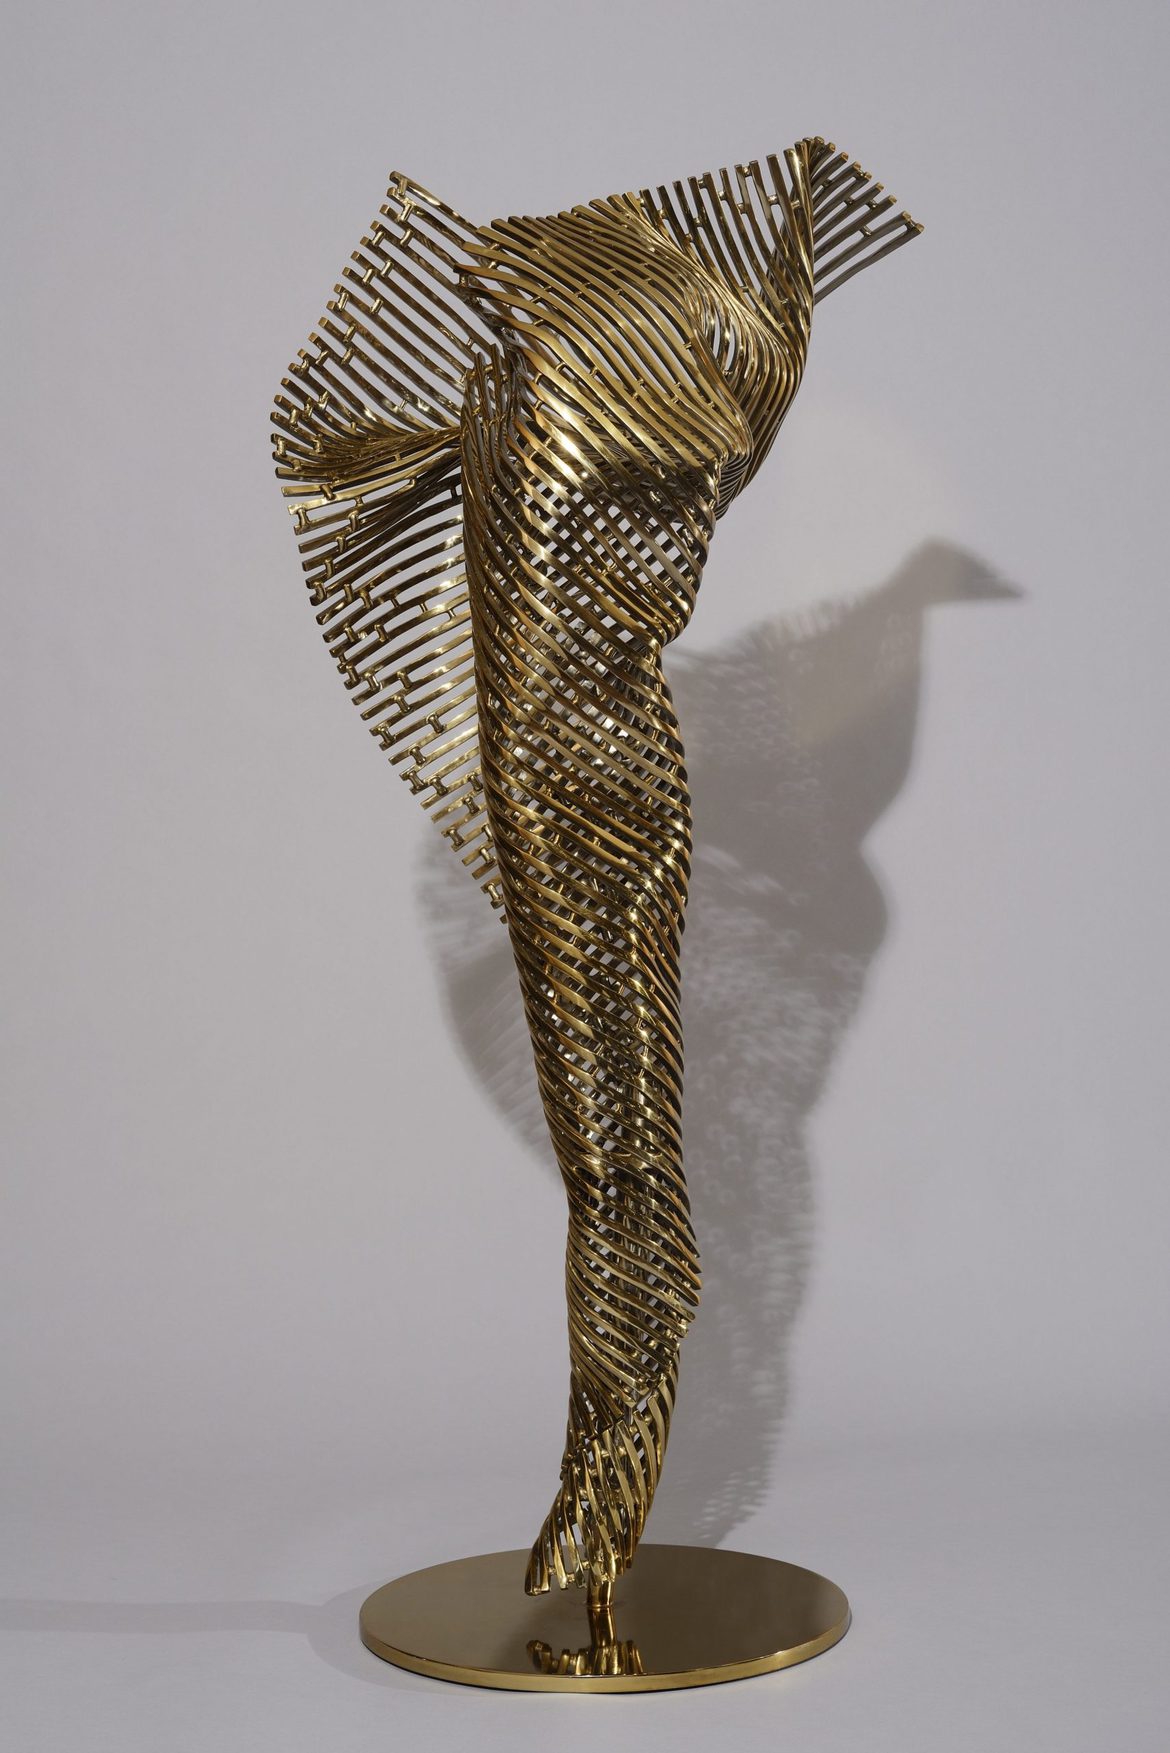 ‘I Am Open’, 2019, stainless steel, gold polychrome, 150 x 66 x 56 cm, edition 1 of 7 + 1AP